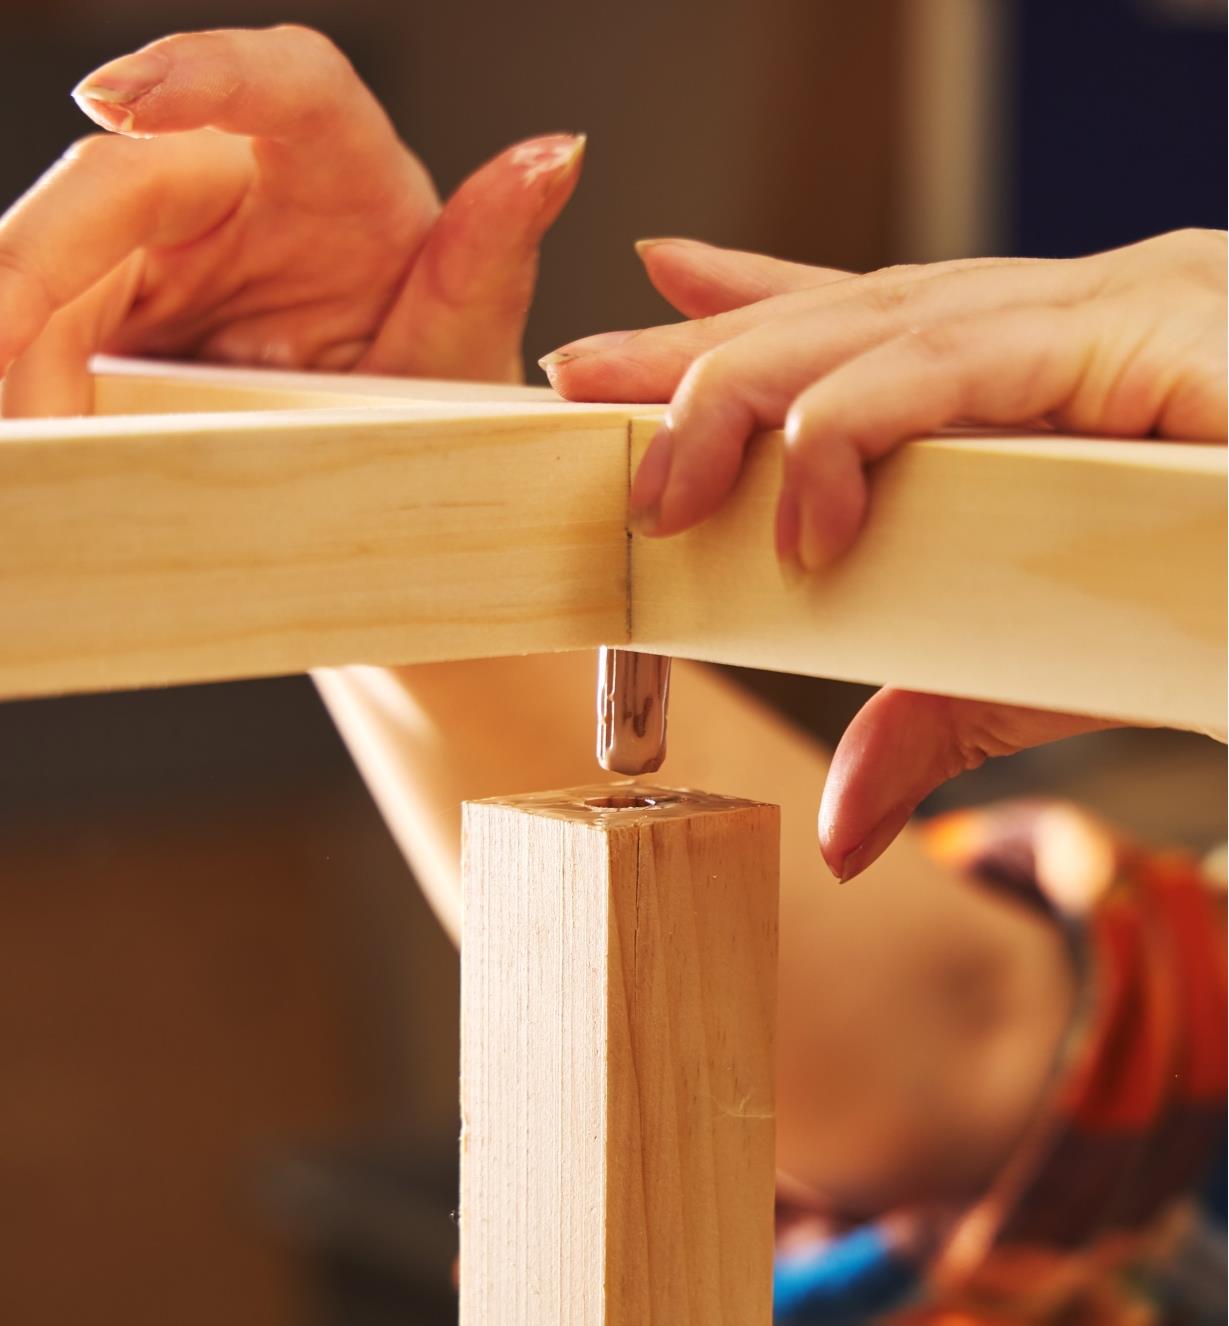 Attaching the jointed arms of the hook and ring game to the post with a dowel